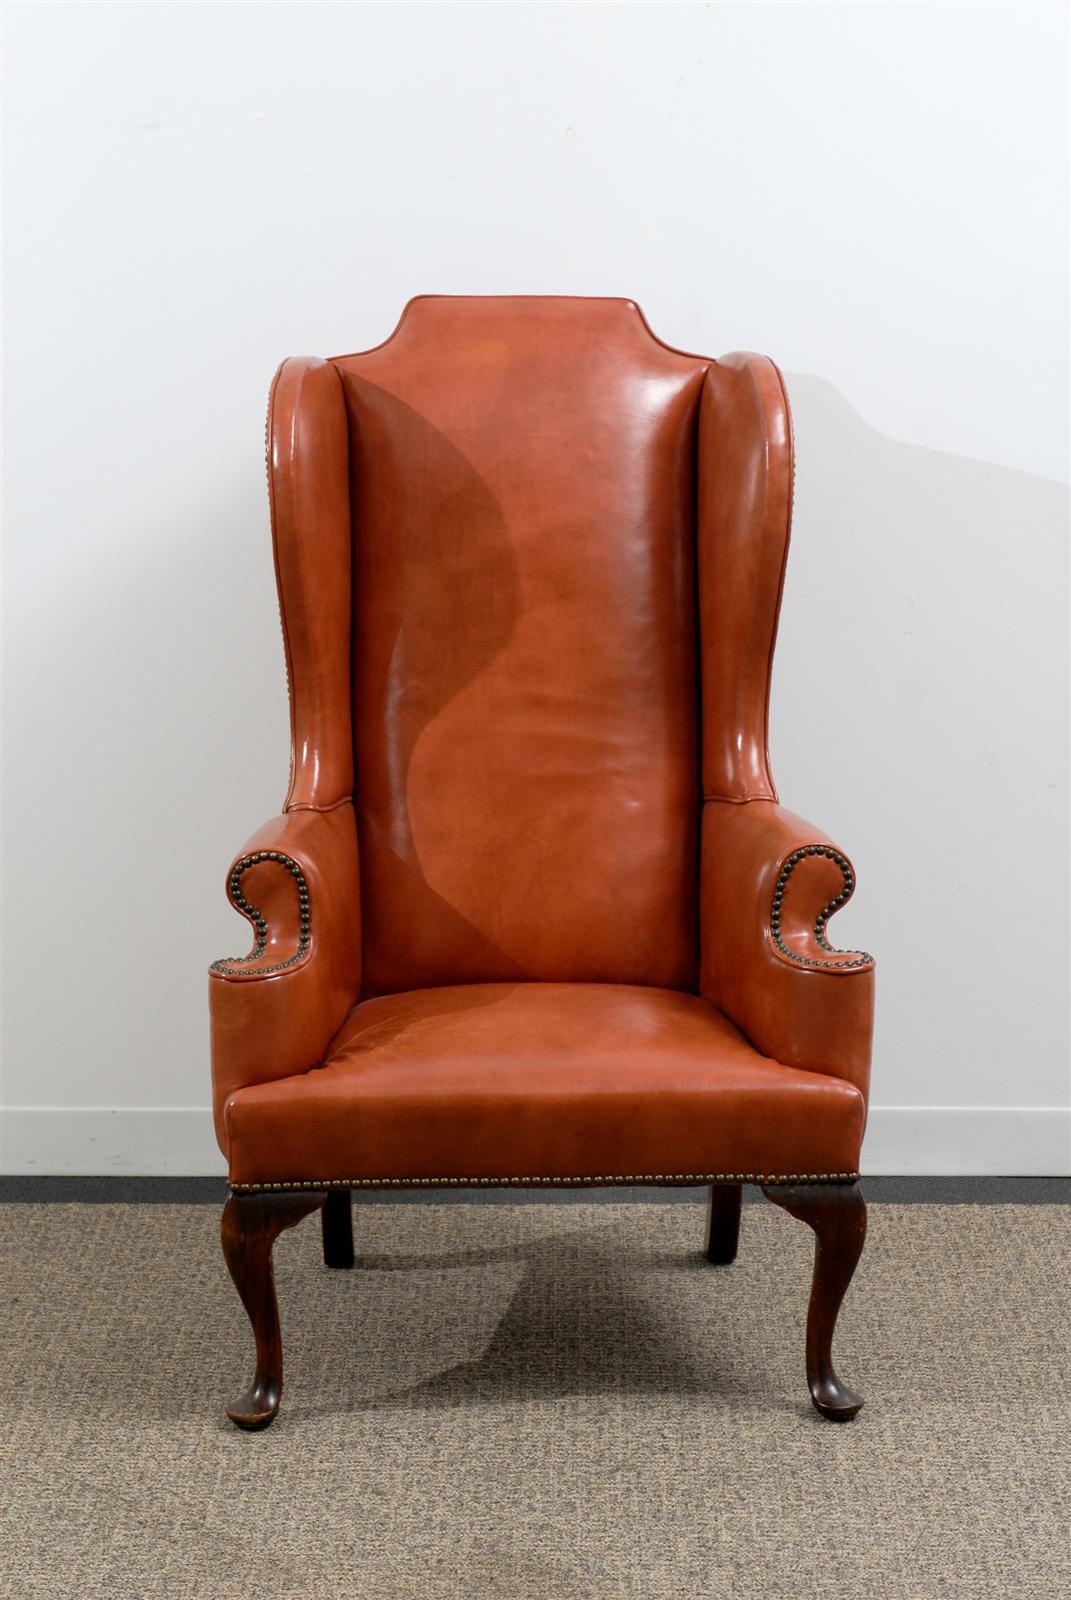 Leather Queen Anne Style Wing Chair in Burnished Orange with Nailhead Trim 1